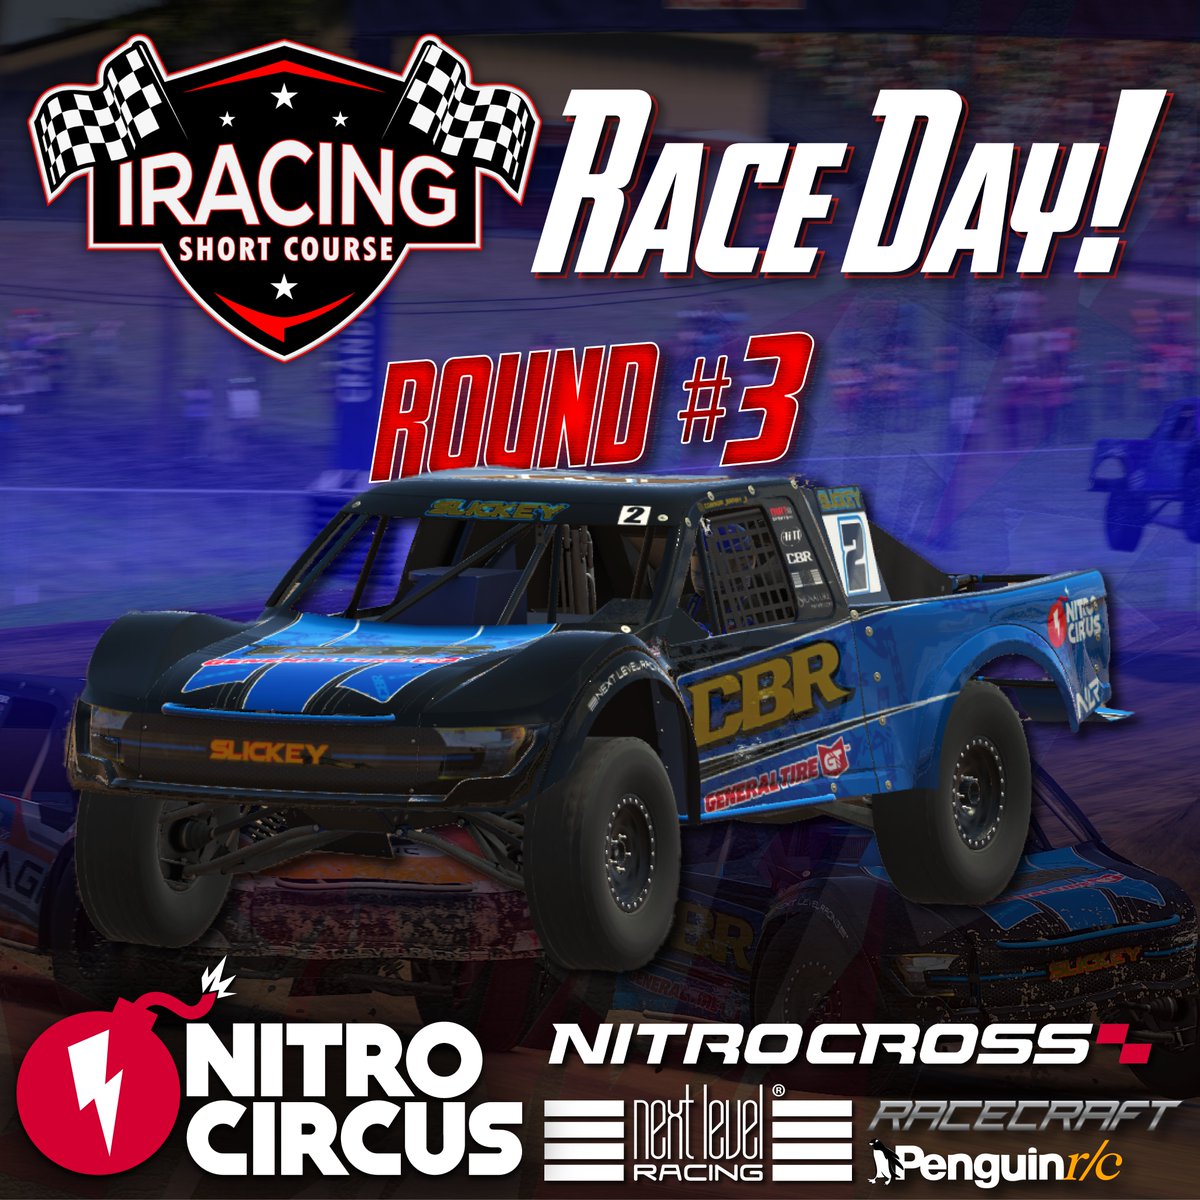 The boys are going racing! @Connor_Barry_2 & @jakob_rafoss are ready to go for Round 3 of the @iRacingshort 2024 National Series! Make sure to tune in live tonight at 6:00pm PT! #NitroCircus